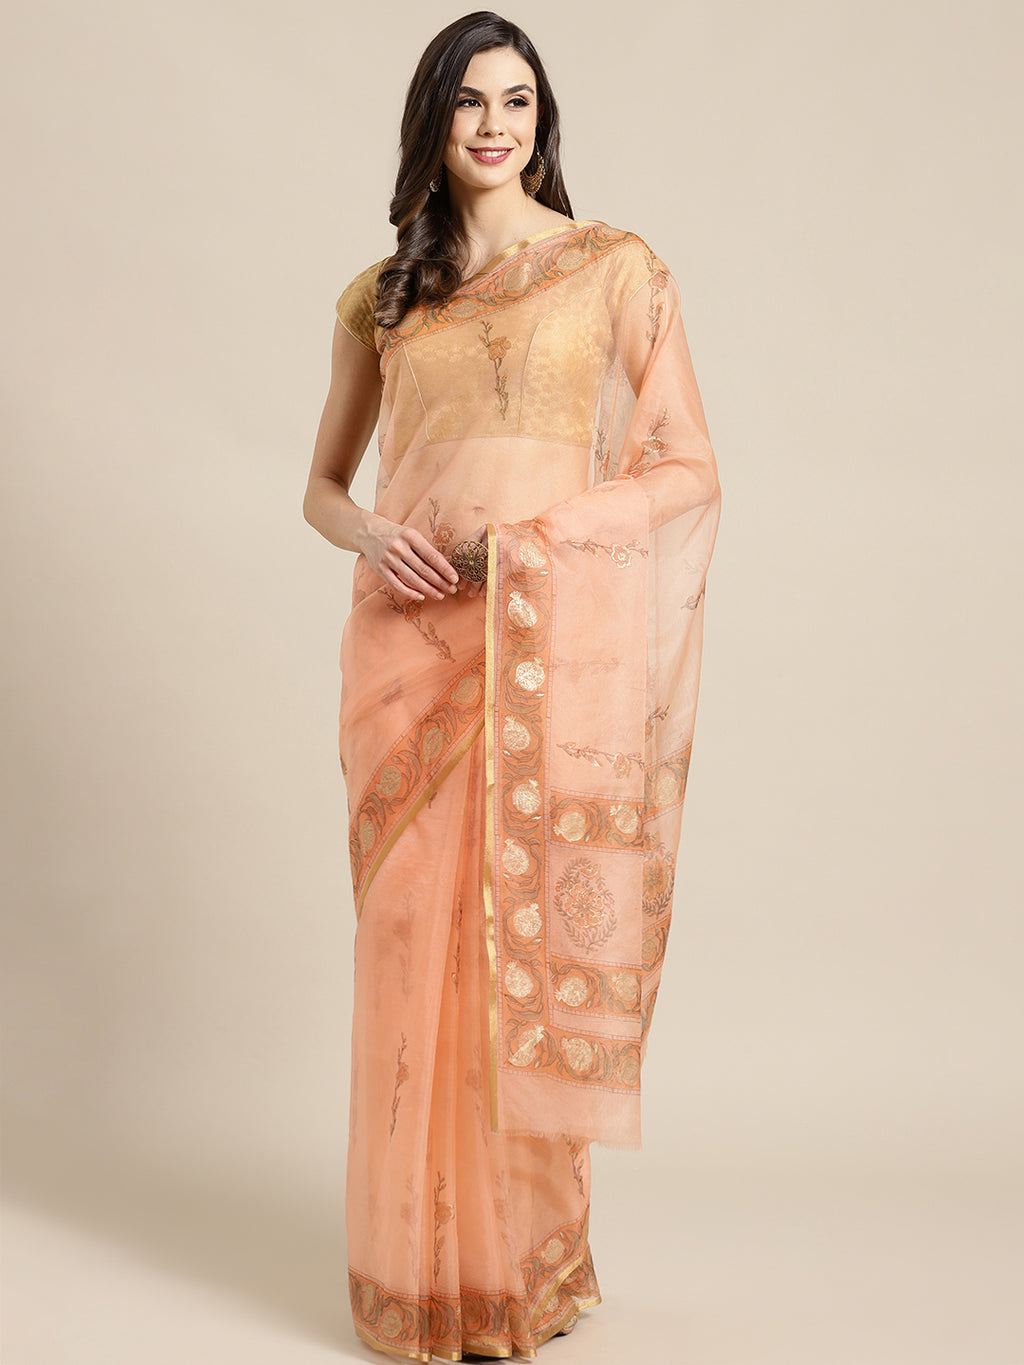 Peach and , Kalakari India Organza Hand Block Print Saree with blouse BHKPSA0148-Saree-Kalakari India-BHKPSA0148-Geographical Indication, Hand Crafted, Hand Painted, Heritage Prints, Natural Dyes, Organza, Red, Sarees, Sustainable Fabrics, Woven, Yellow-[Linen,Ethnic,wear,Fashionista,Handloom,Handicraft,Indigo,blockprint,block,print,Cotton,Chanderi,Blue, latest,classy,party,bollywood,trendy,summer,style,traditional,formal,elegant,unique,style,hand,block,print, dabu,booti,gift,present,glamorous,a